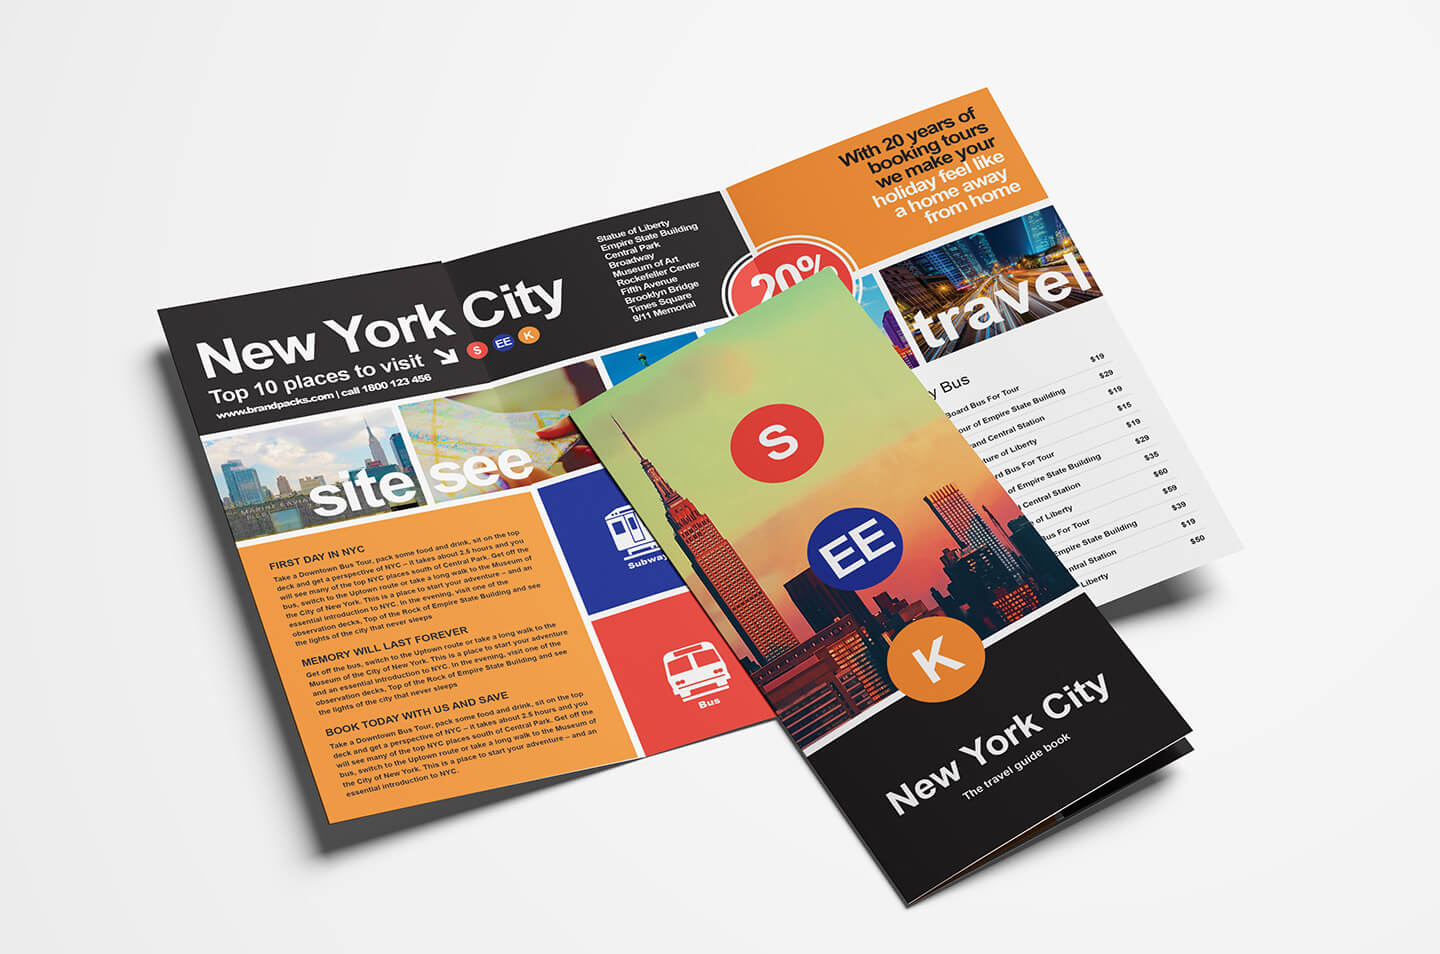 006 Free Travel Trifold Brochure Template Striking Ideas Psd Pertaining To Travel And Tourism Brochure Templates Free